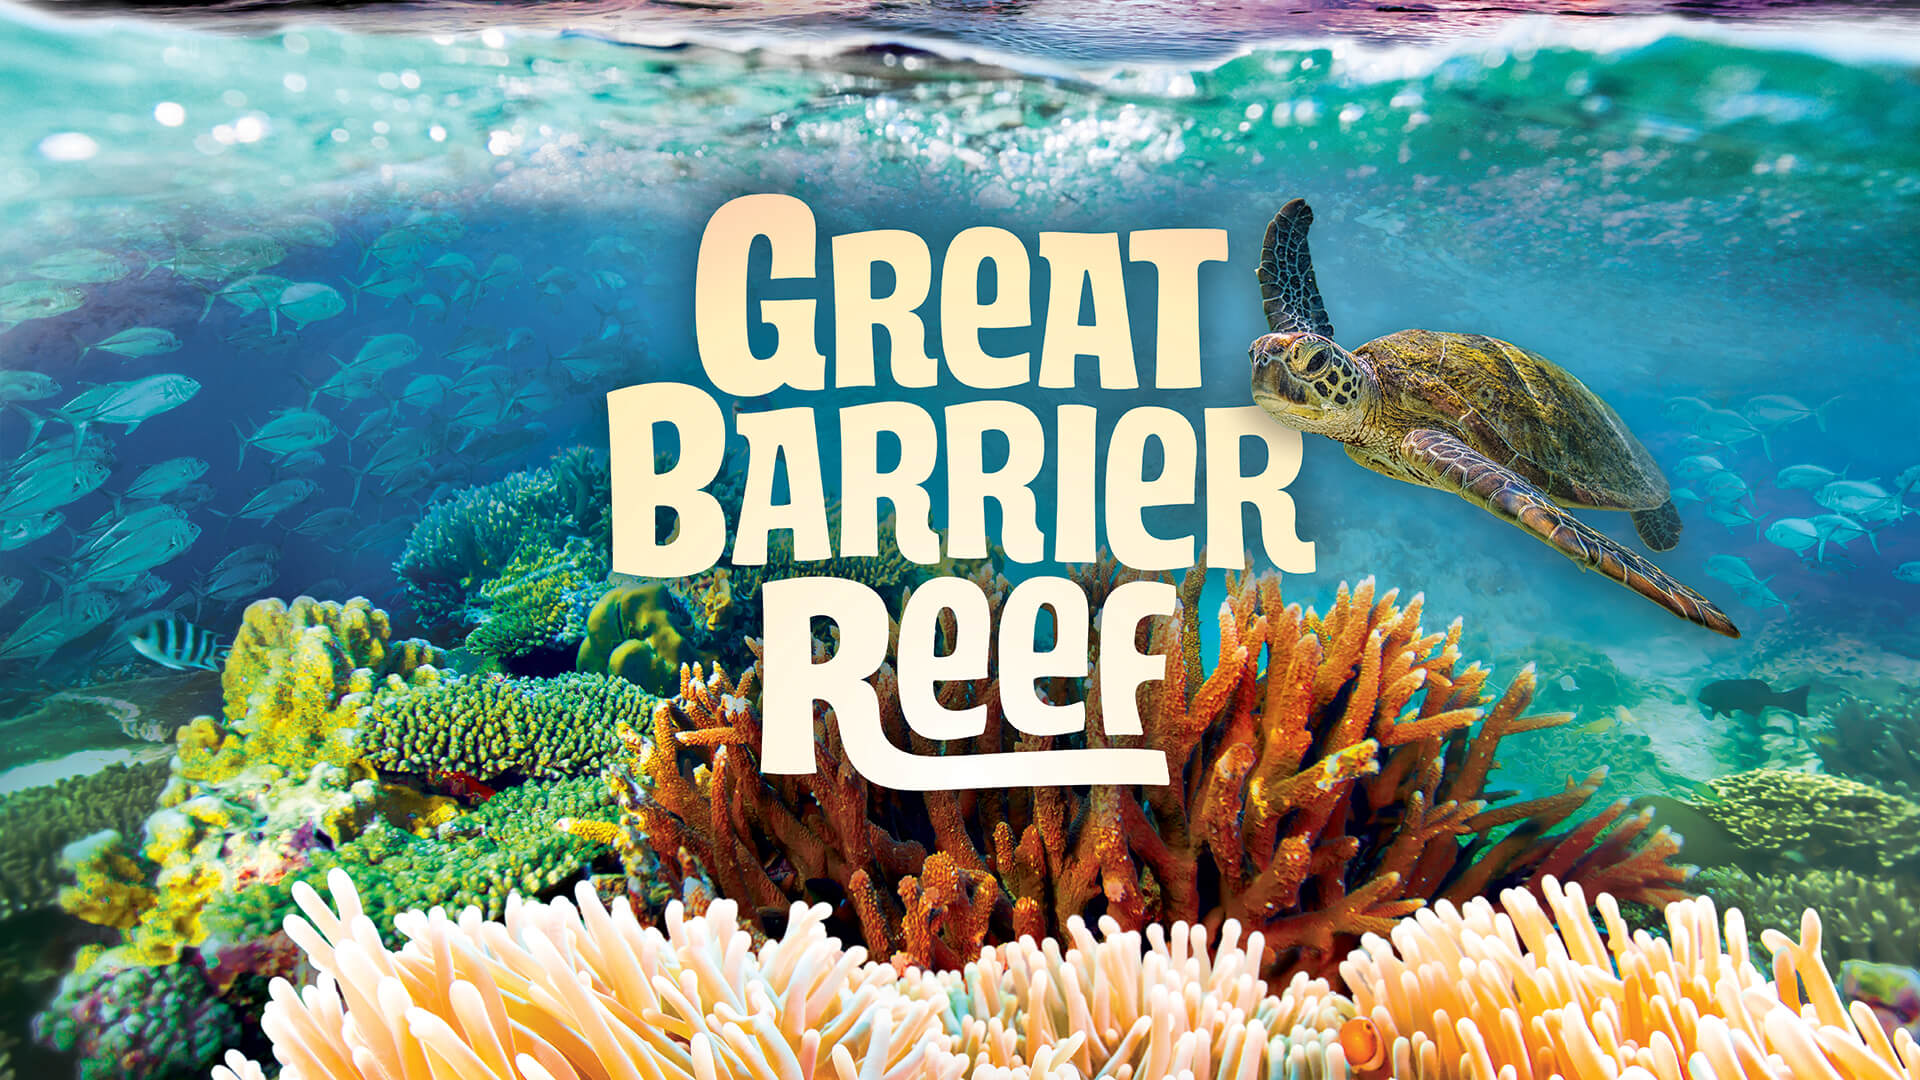 Great Barrier Reef title with sea turtle swimming over a reef.